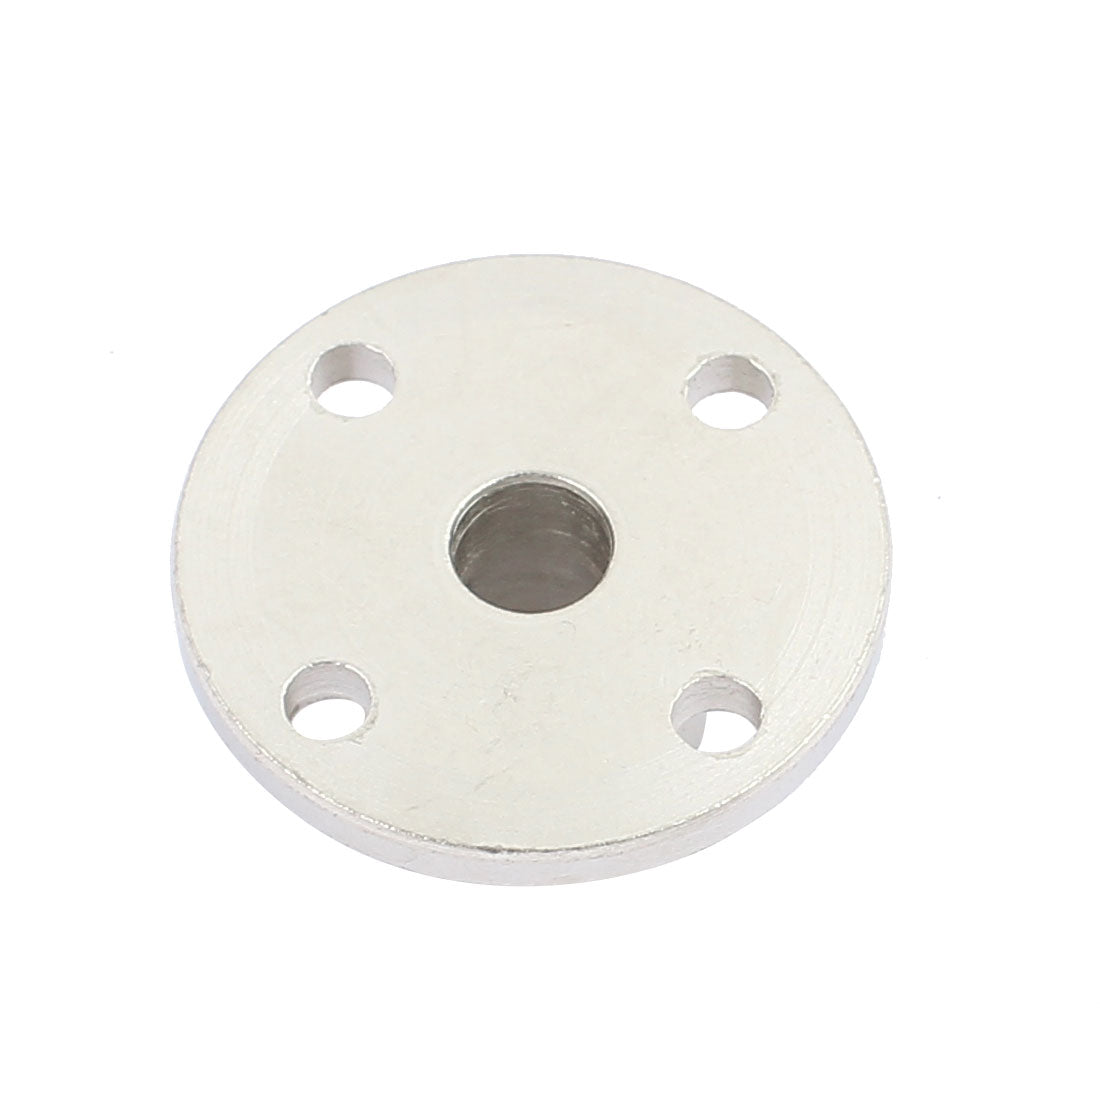 uxcell Uxcell Rigid Flange Coupling Motor Guide Shaft Coupler Motor Connector for DIY Parts silver